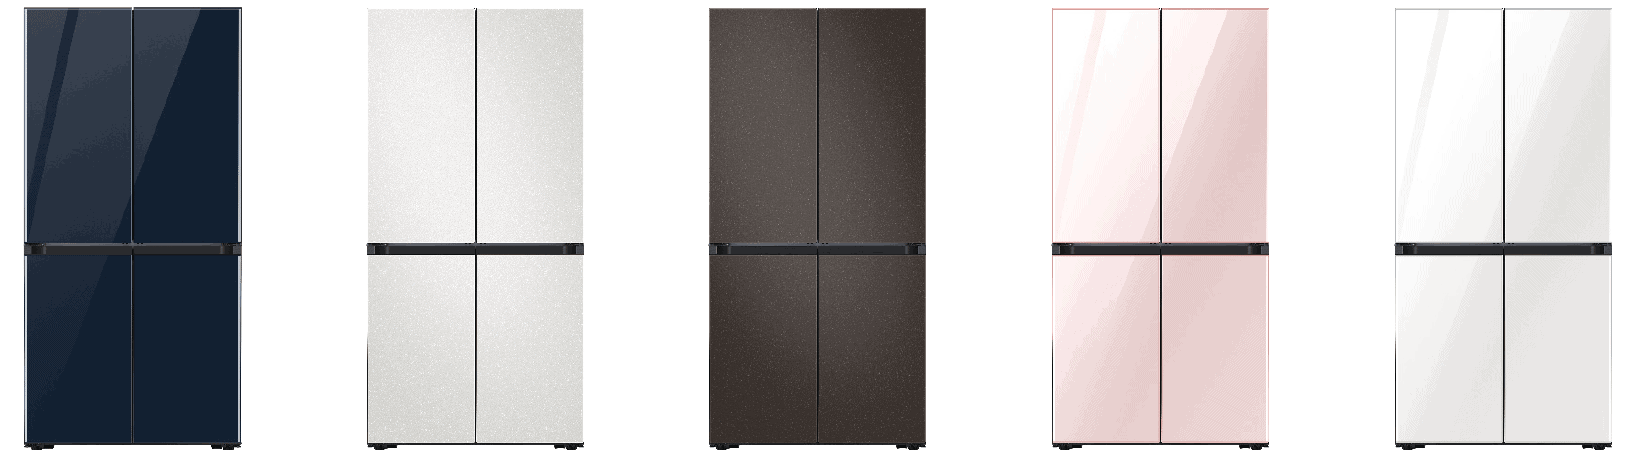 The Samsung Bespoke refrigerator is one cool customiser you can design to your taste in your kitchen